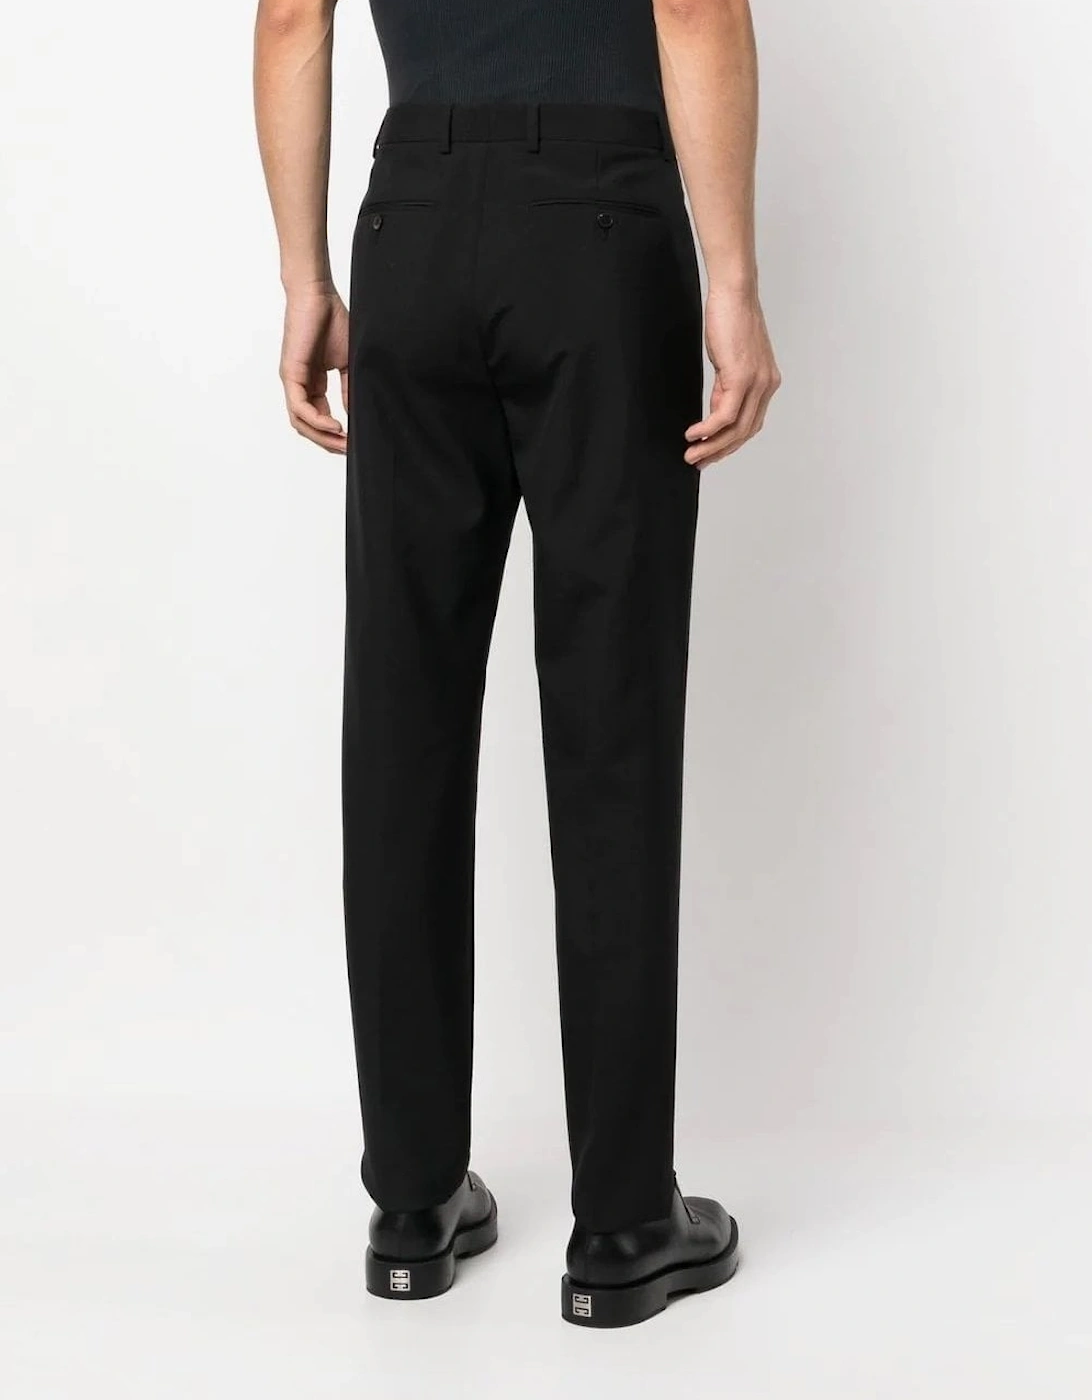 Tailoring Wool Trousers